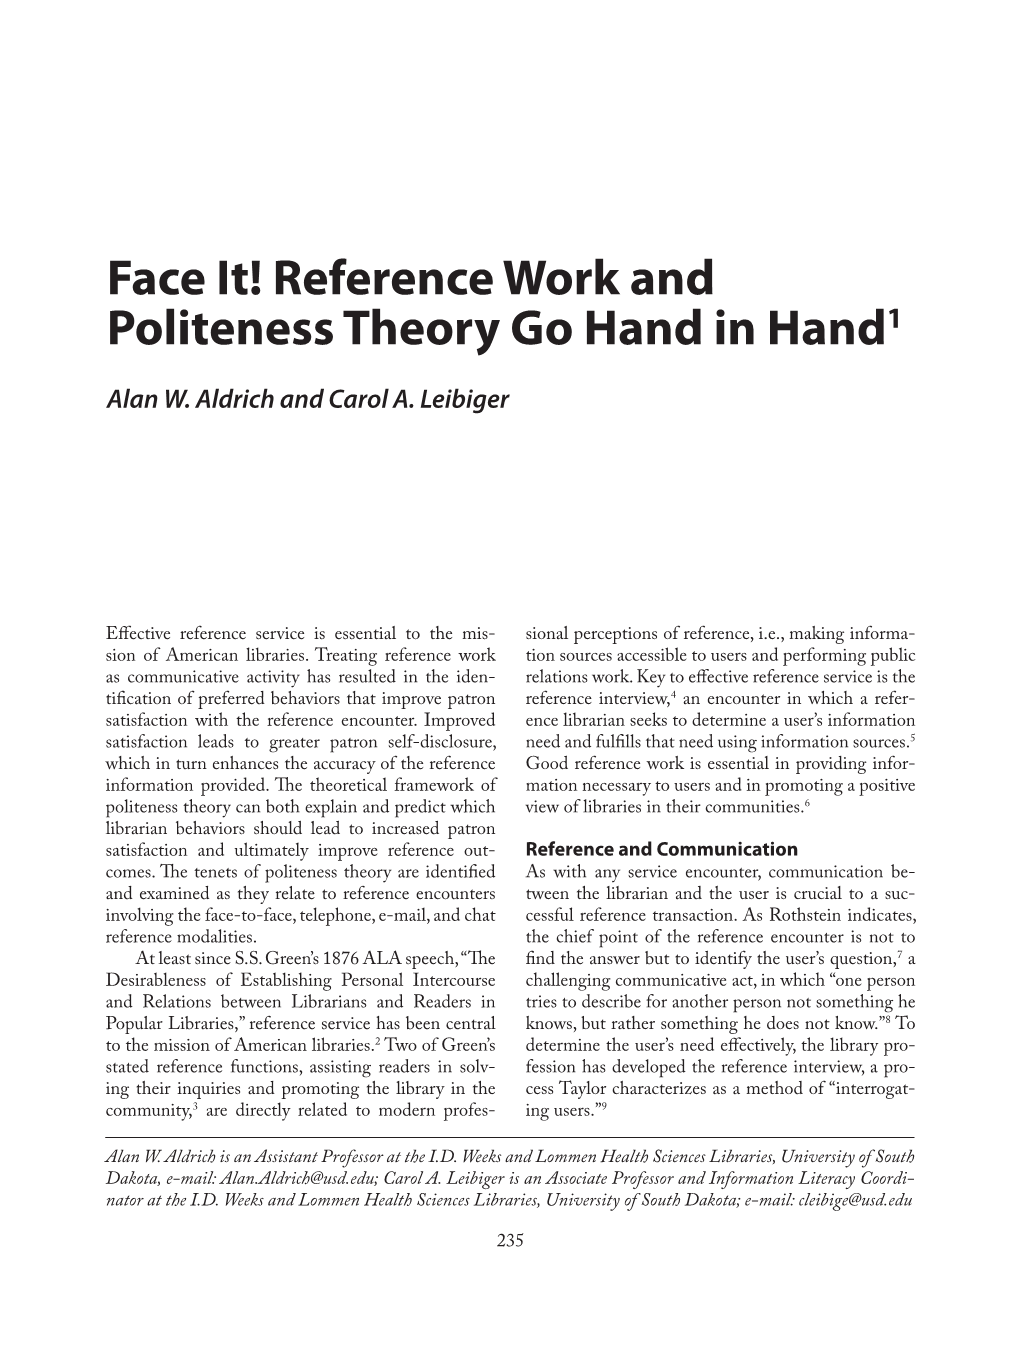 Face It! Reference Work and Politeness Theory Go Hand in Hand1